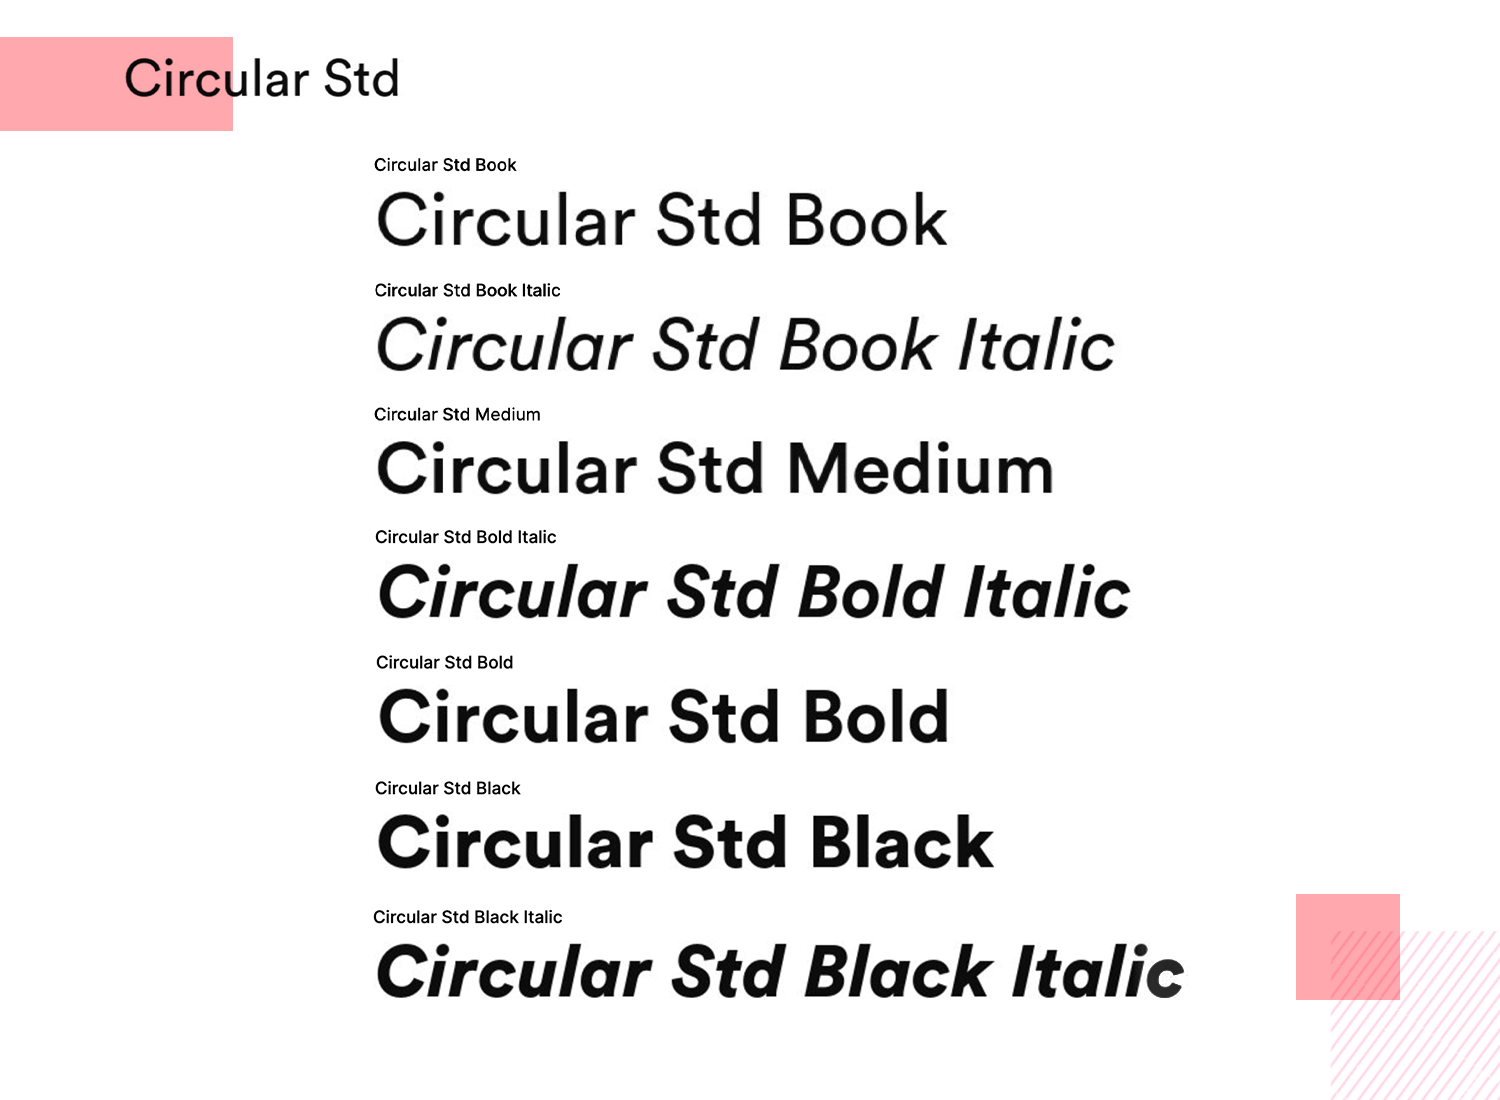 Circular font variations in regular and bold styles